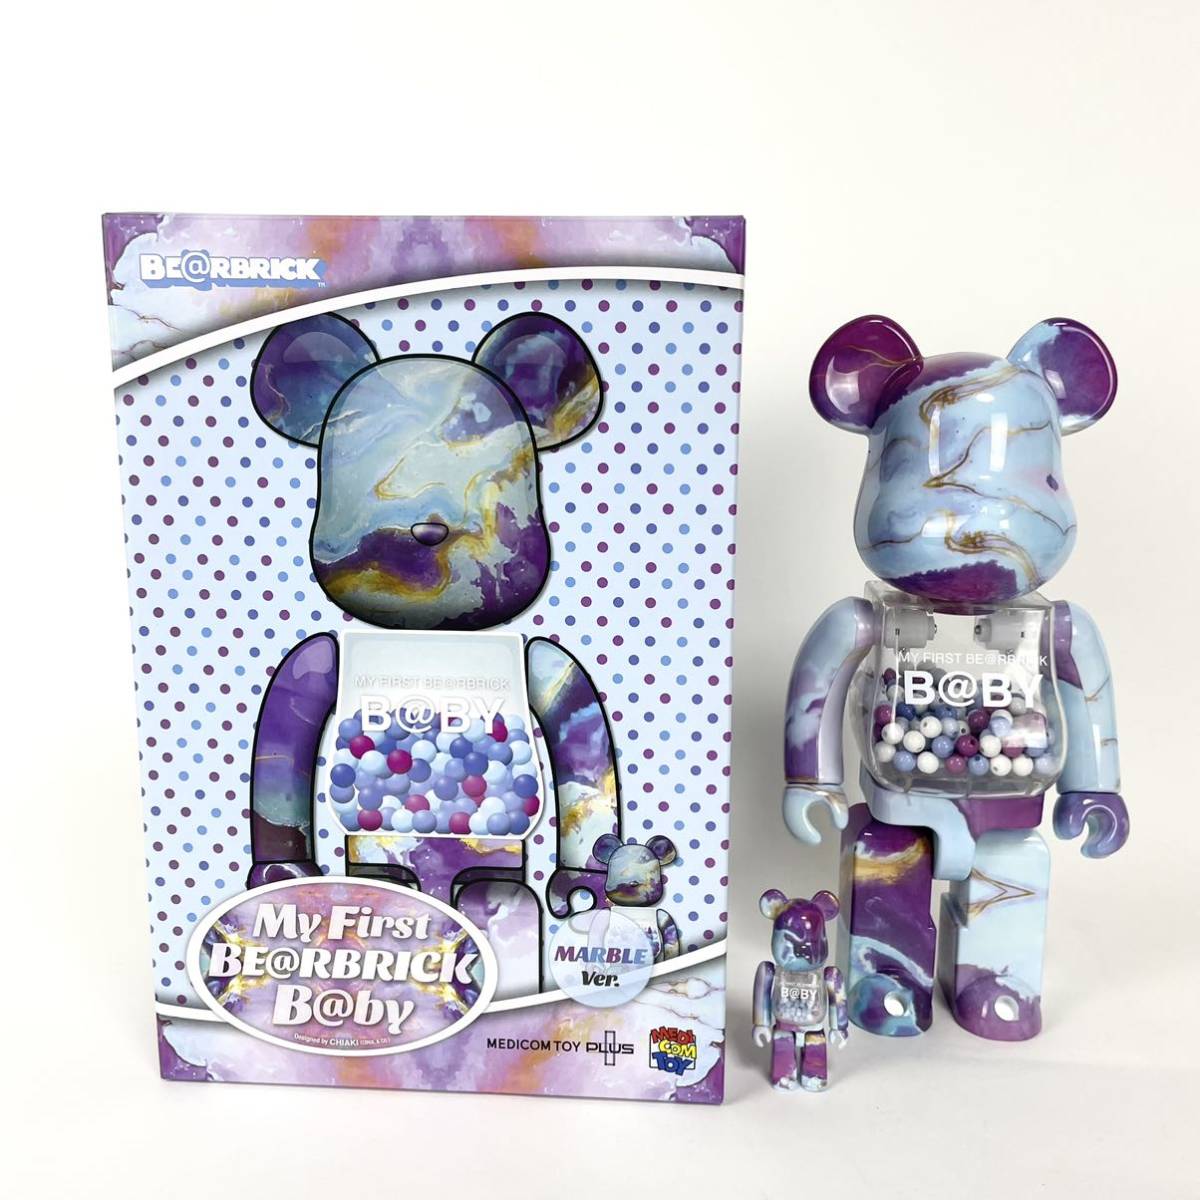 MEDICOM TOY MY FIRST BE@RBRICK B@BY MARBLE Ver 100％ & 400％ ベア